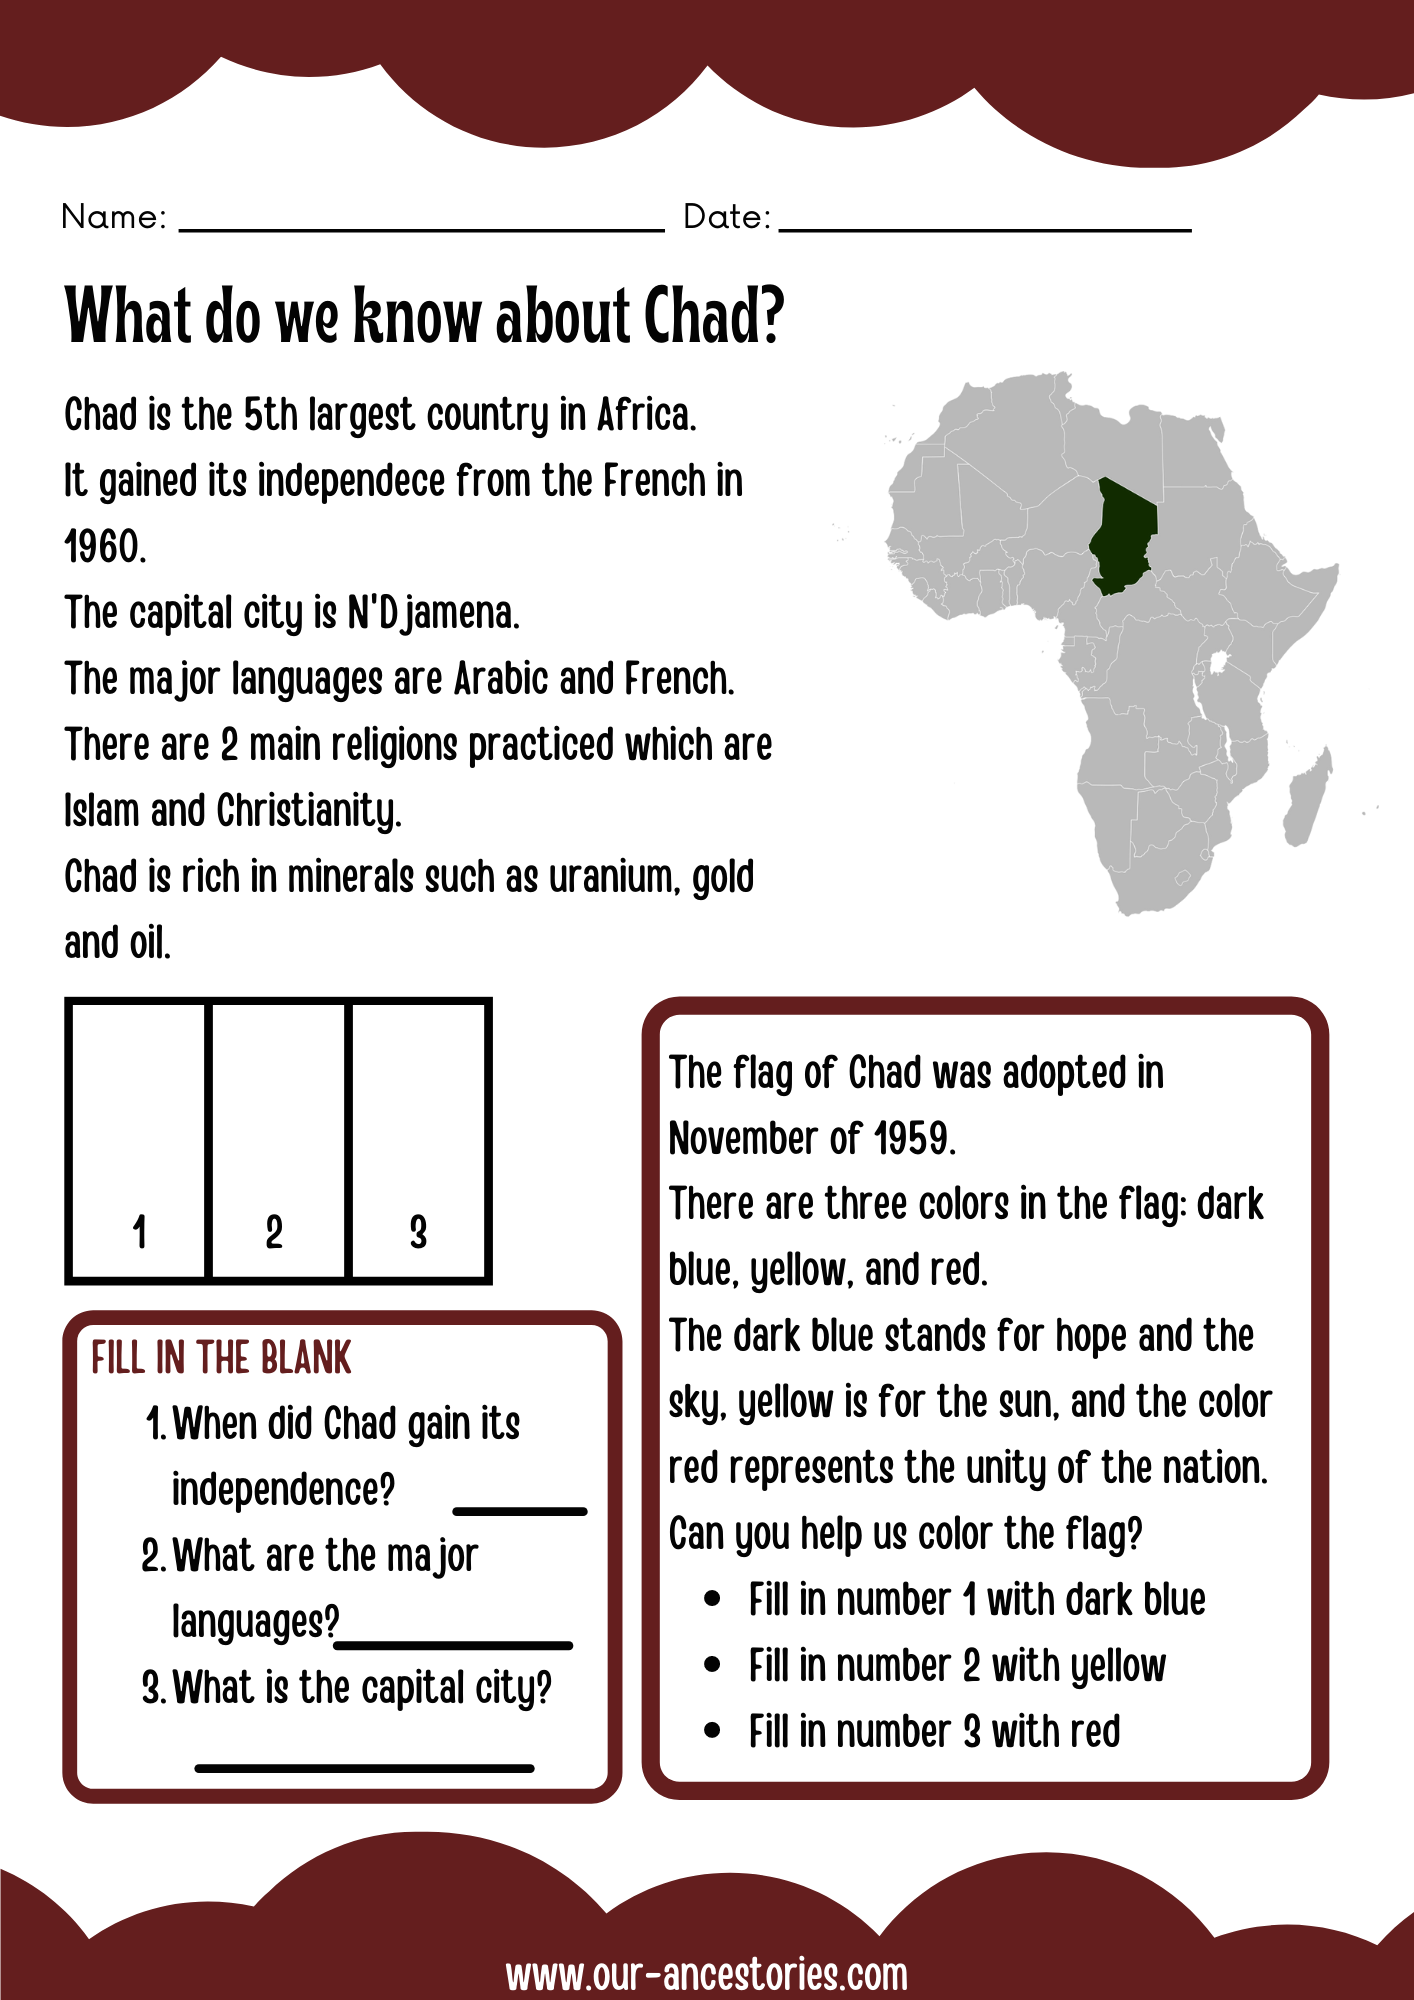 Our Ancestories - Chad Country Profile - Free Worksheets